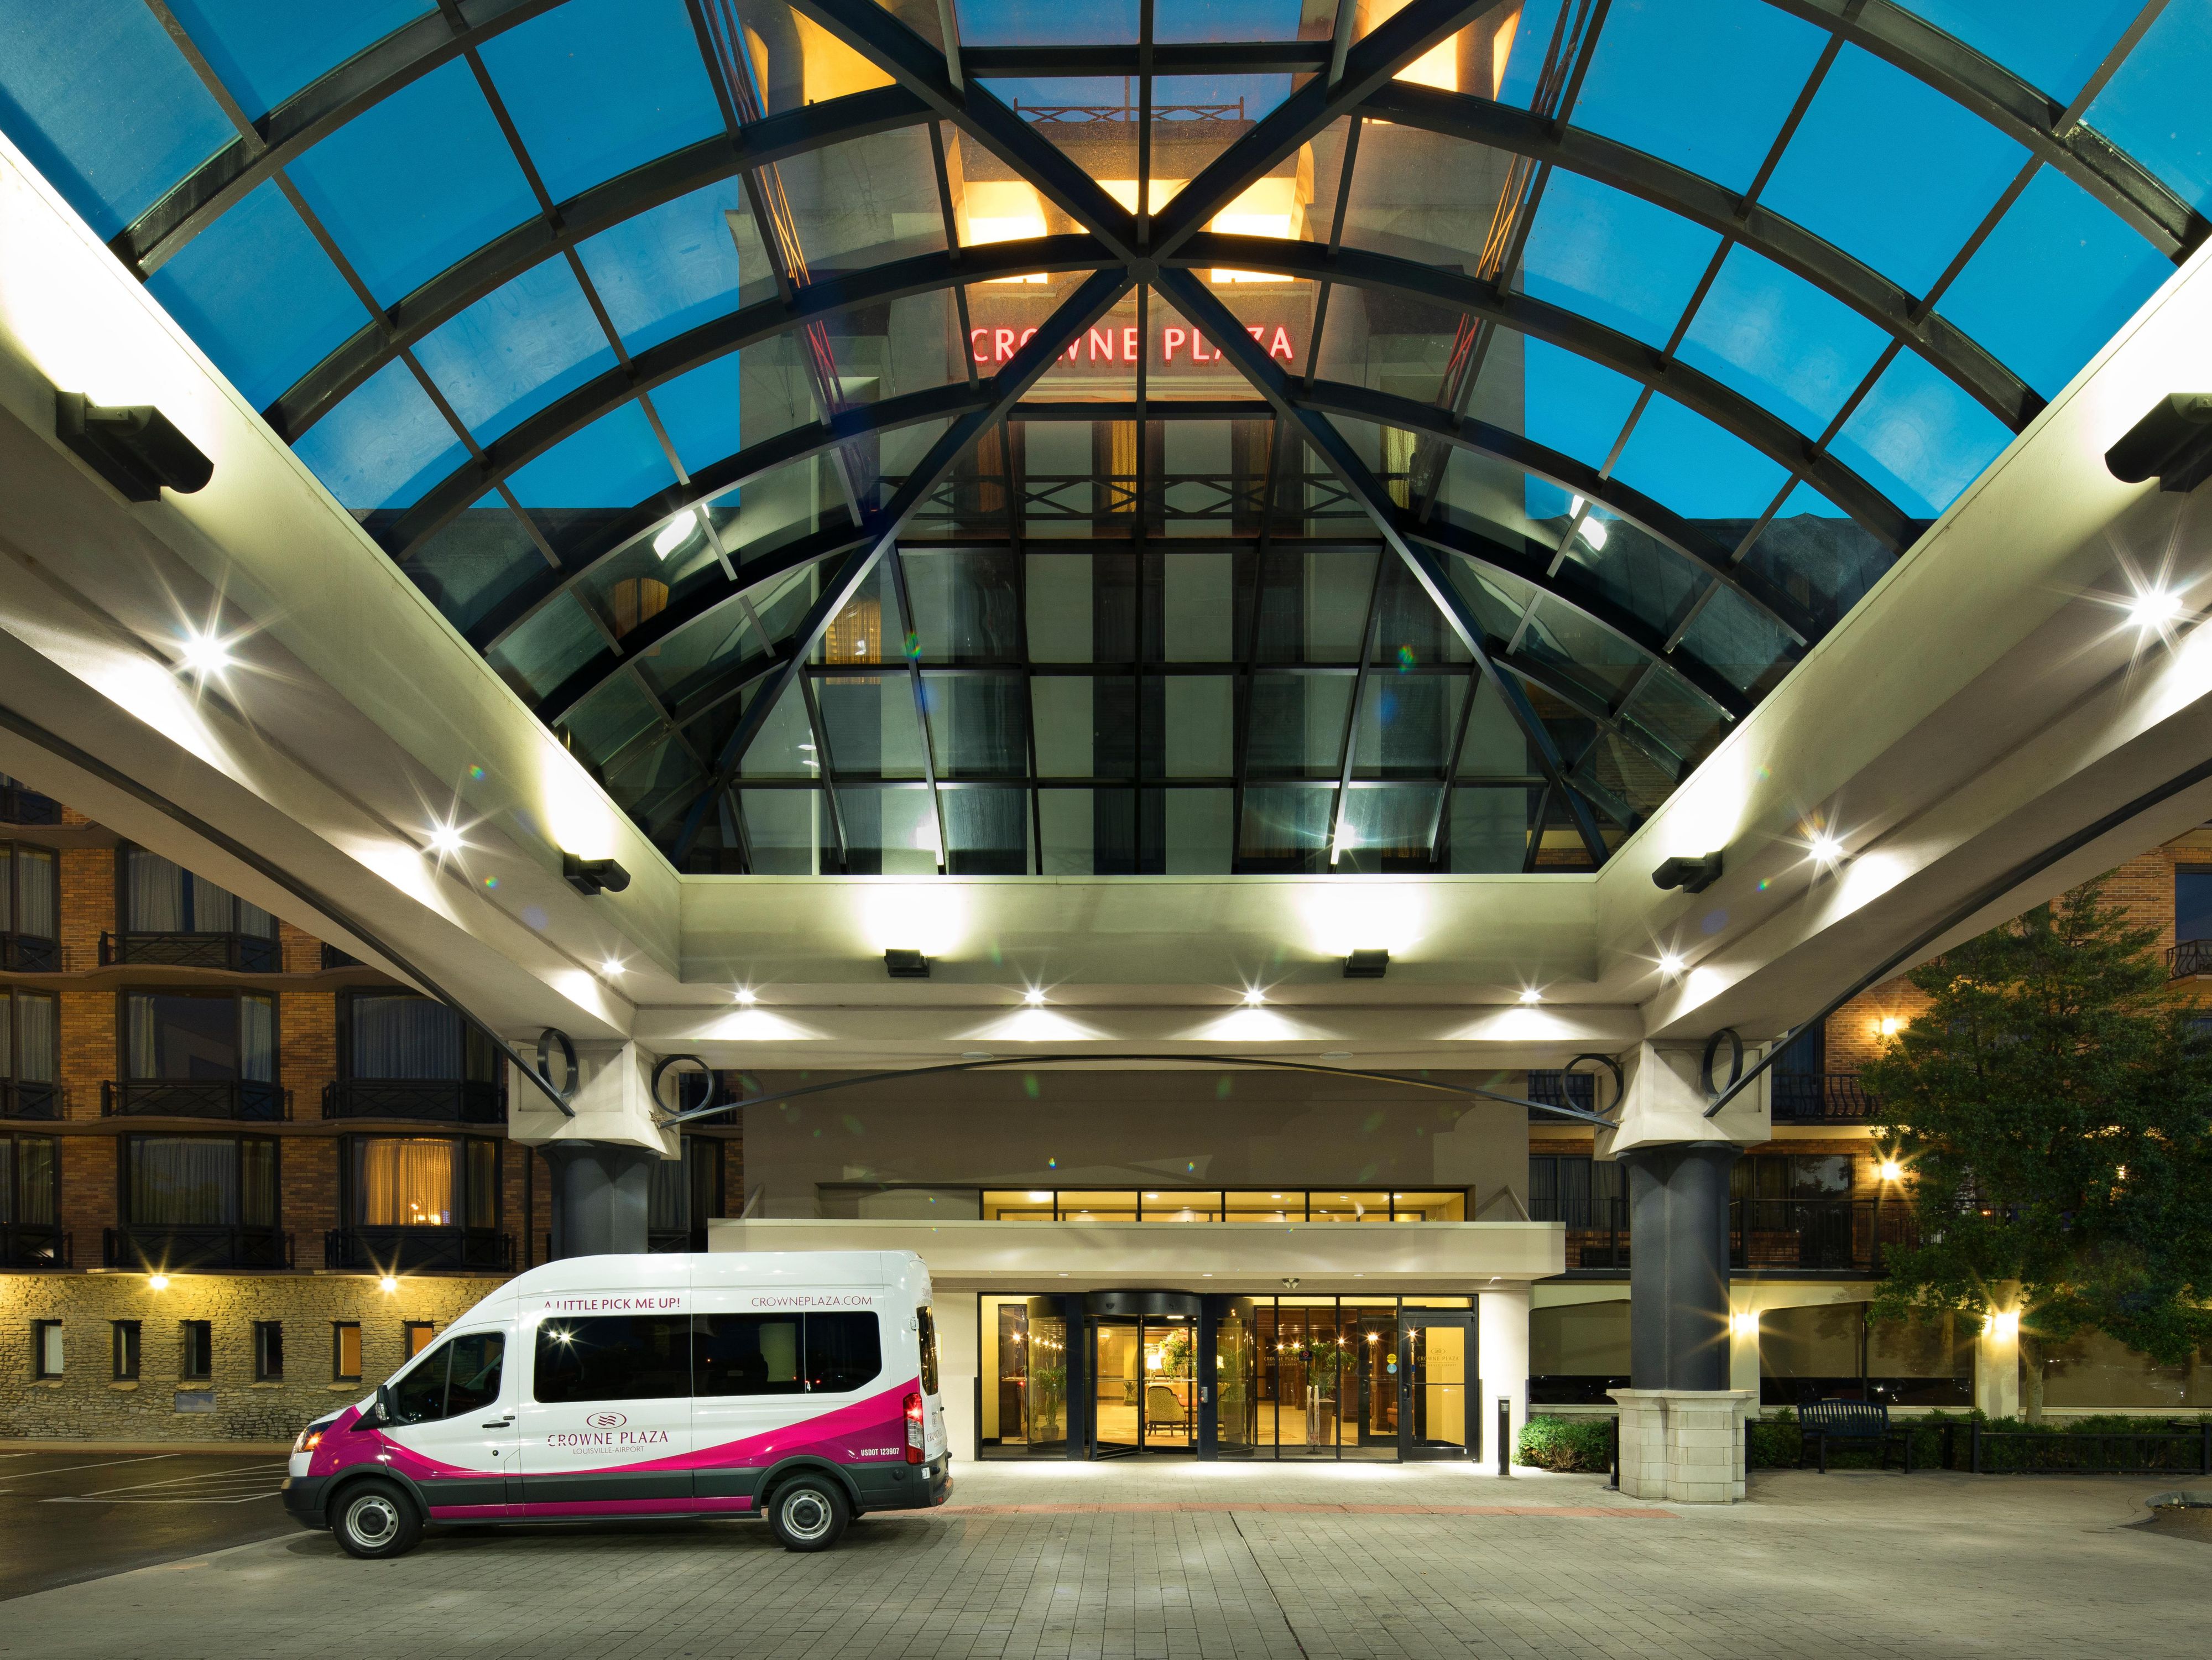 Enjoy the convenience of free parking with a free airport shuttle at our Louisville Airport Expo Ctr hotel. Leave your car with us for a stress-free ride to and from the airport. It's just one of the many ways we make your stay exceptional. Also, check out global parking for a discounted off-site parking option with a free airport shuttle.
